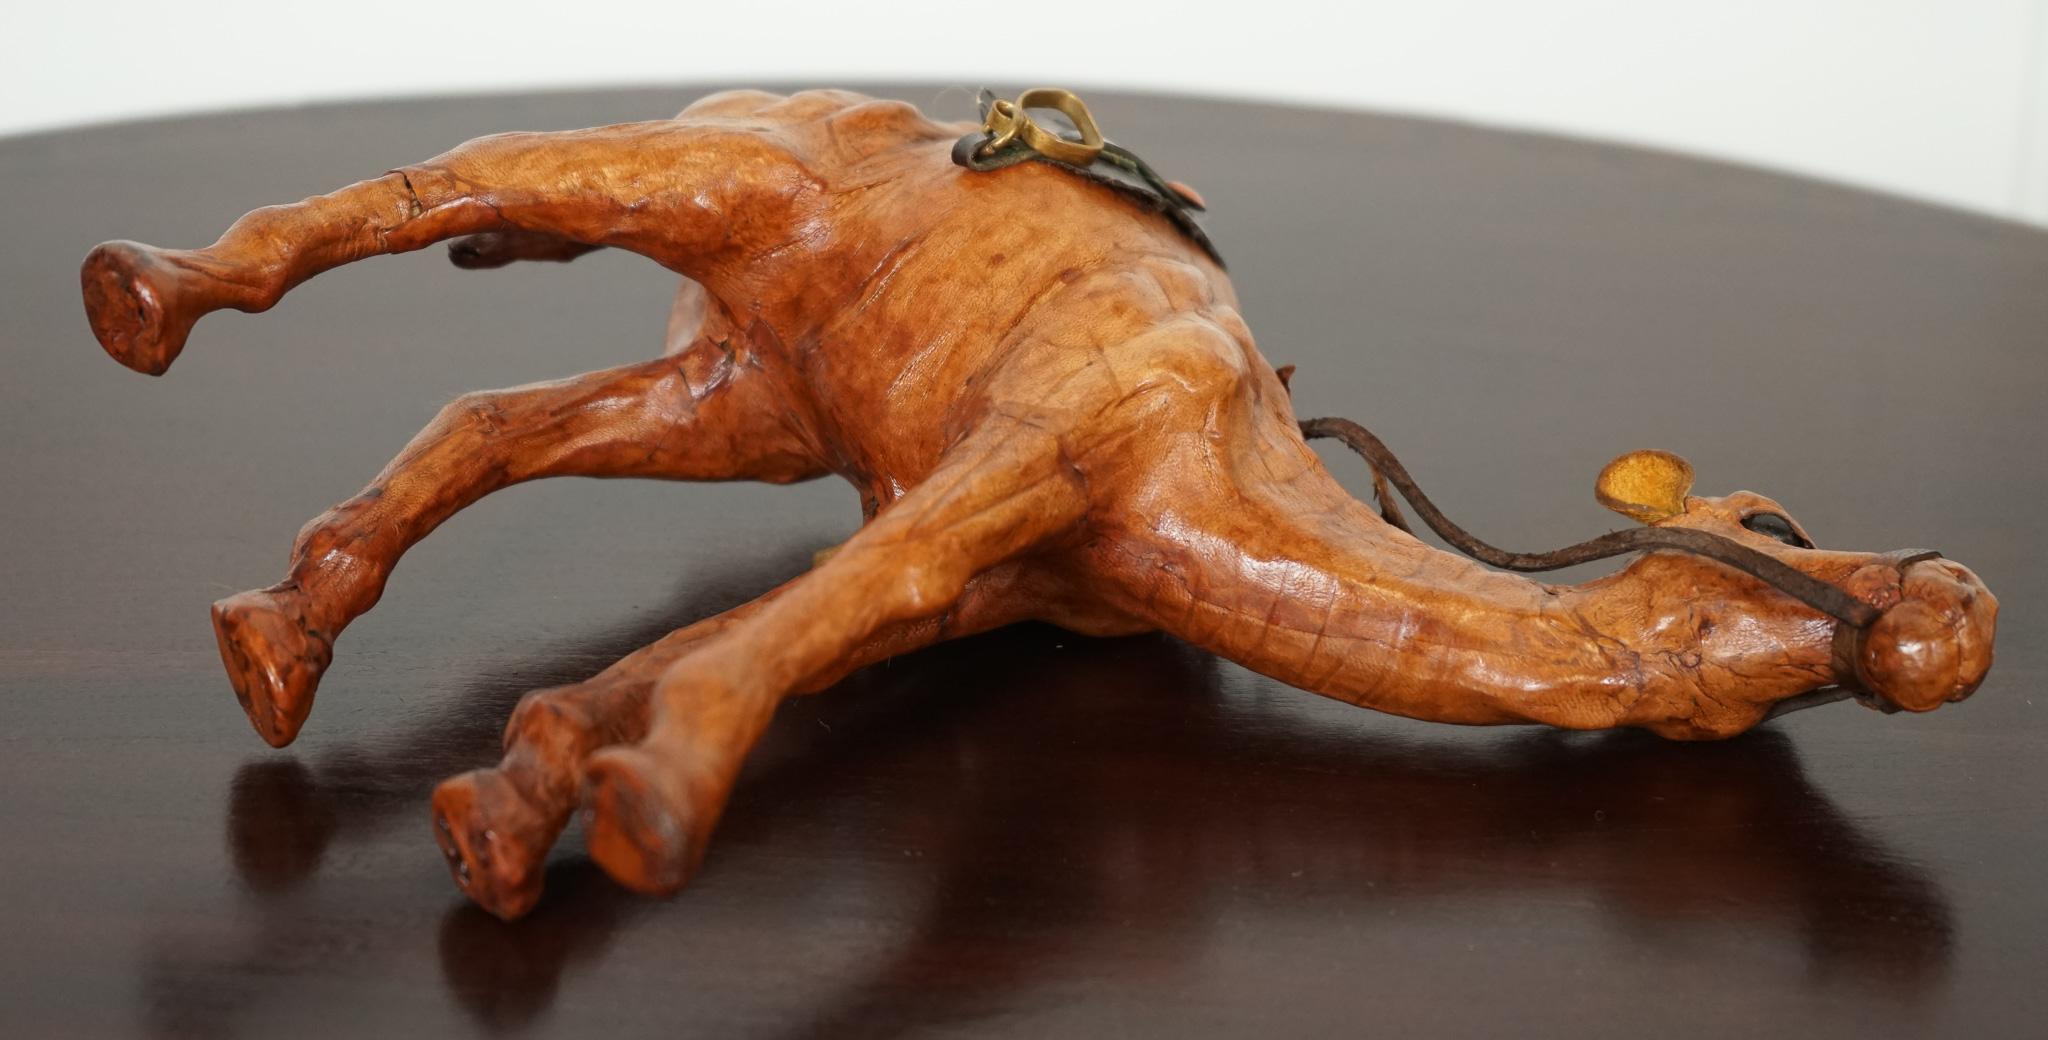 Leather LIBERTY'S LONDON CAMEL SCULPTURE WiTH LOVELY AGED LEATHER ON HAND CARVED WOOD  For Sale